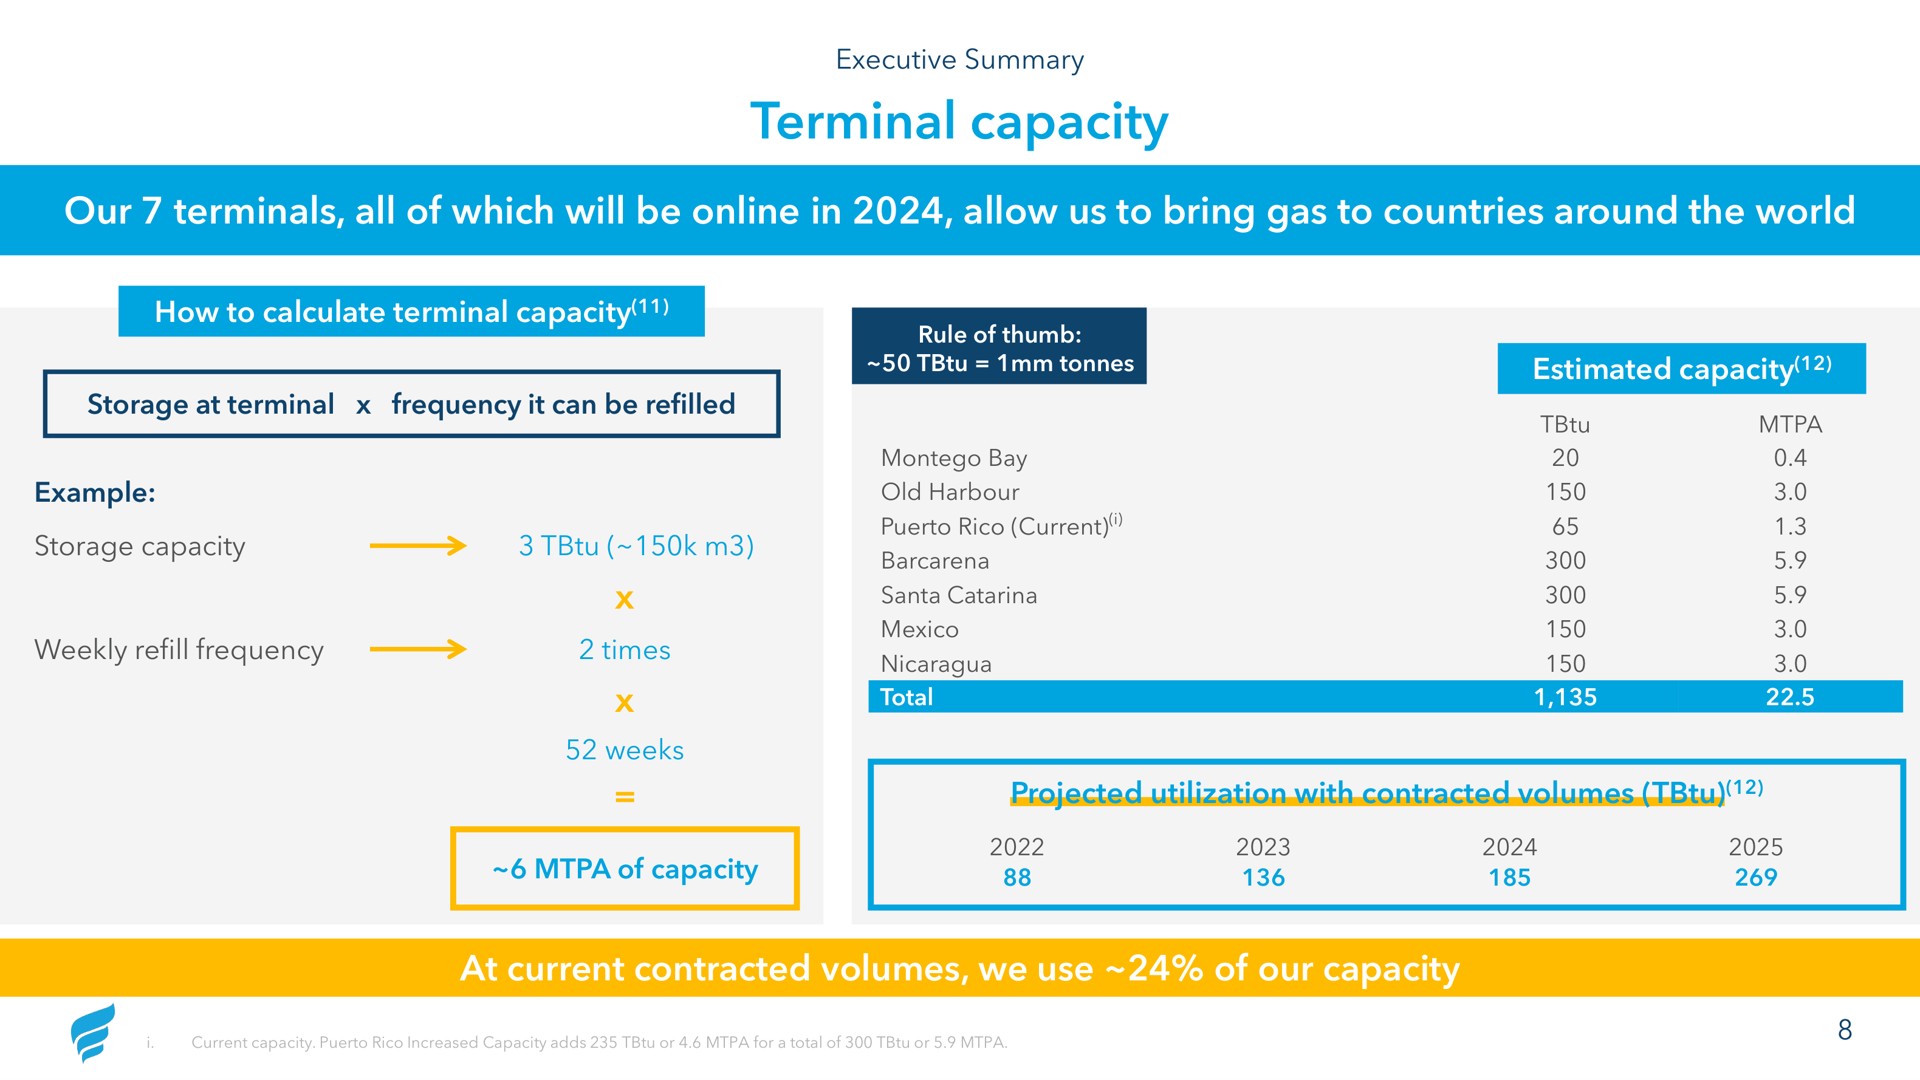 terminal capacity our terminals all of which will be in allow us to bring gas to countries around the world how to calculate terminal capacity estimated capacity projected utilization with contracted volumes at current contracted volumes we use of our capacity | NewFortress Energy